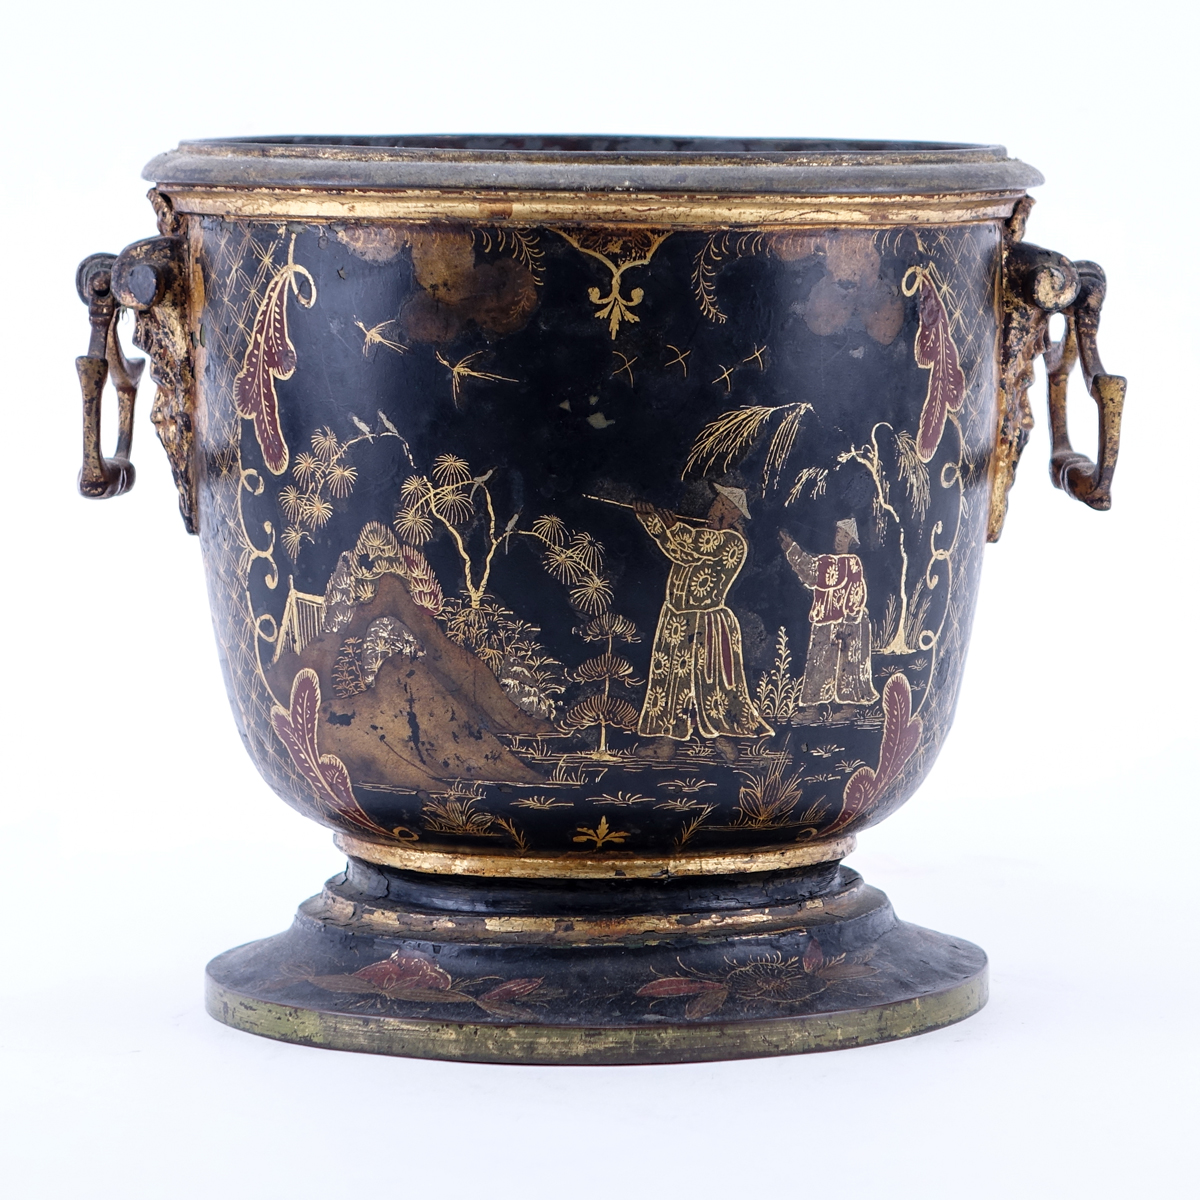 Antique style Toleware Cachepot With Chinese Motif. Unsigned.